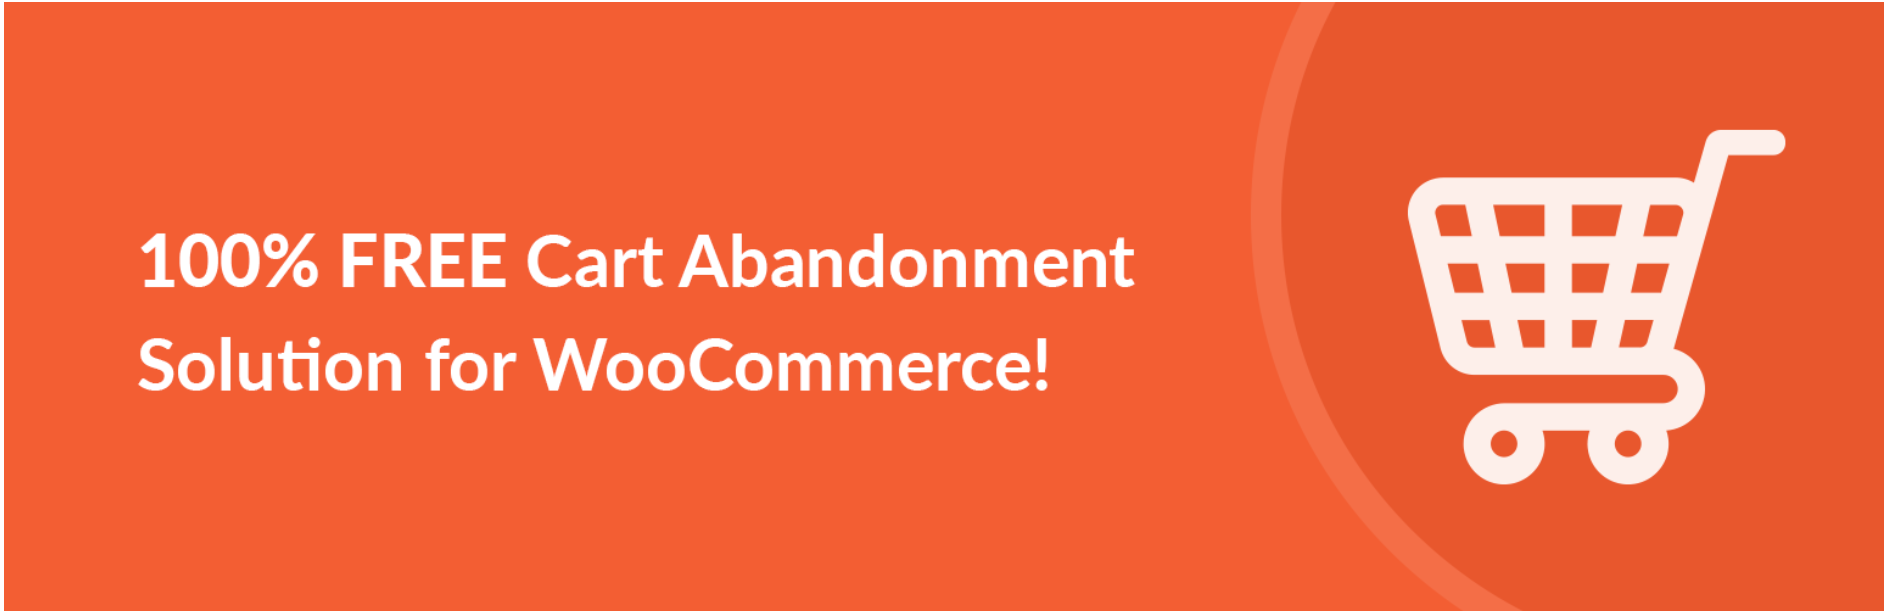 woocommerce abandoned cart recovery by cartflows image